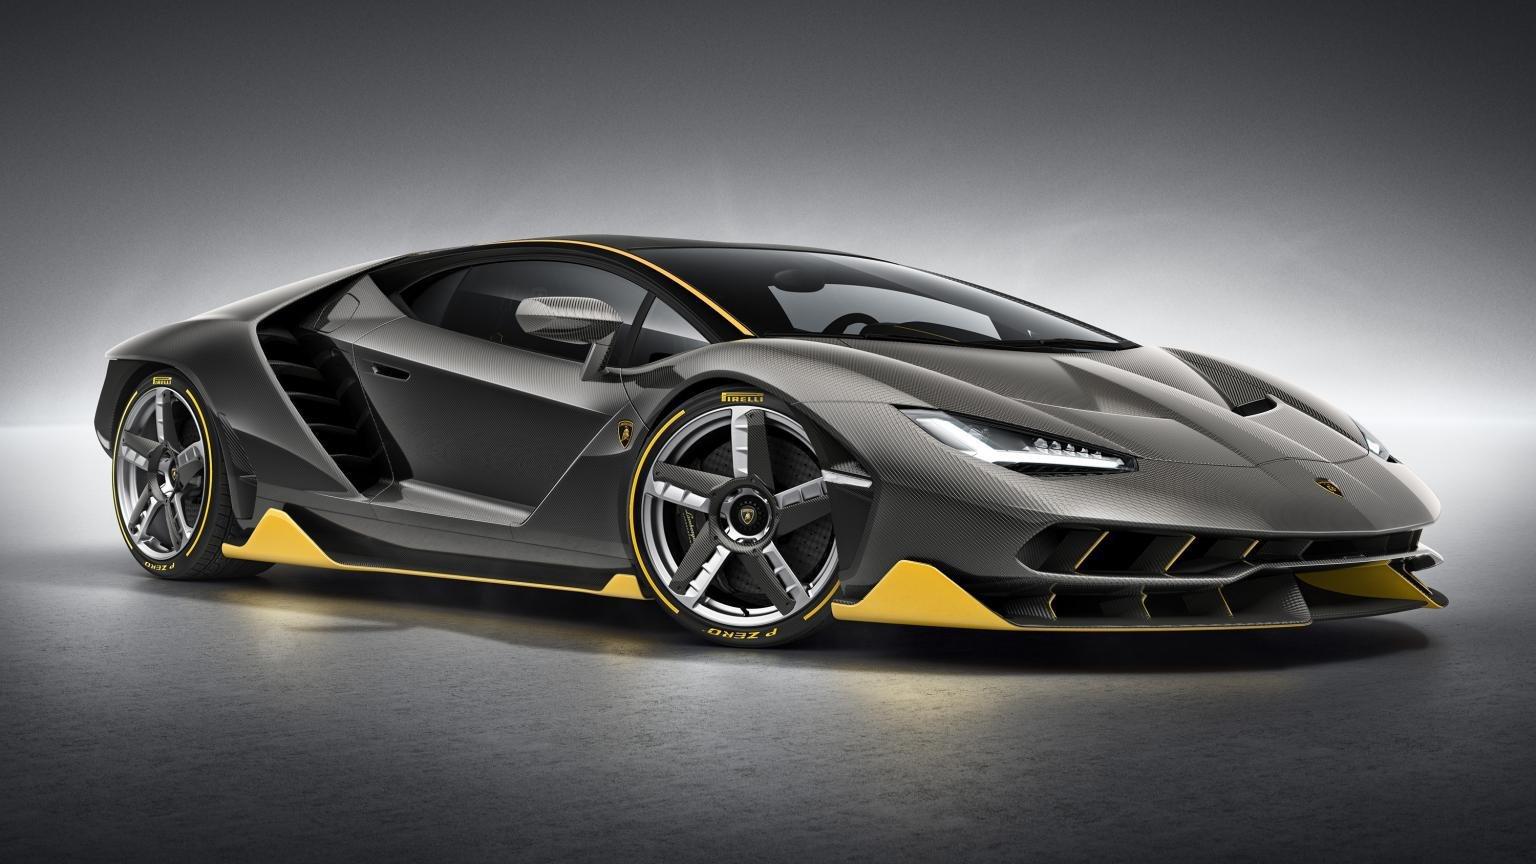 Lamborghini Are Manufacturing Just 40 Units Of Their Latest Supercar & They’re Already Sold Out